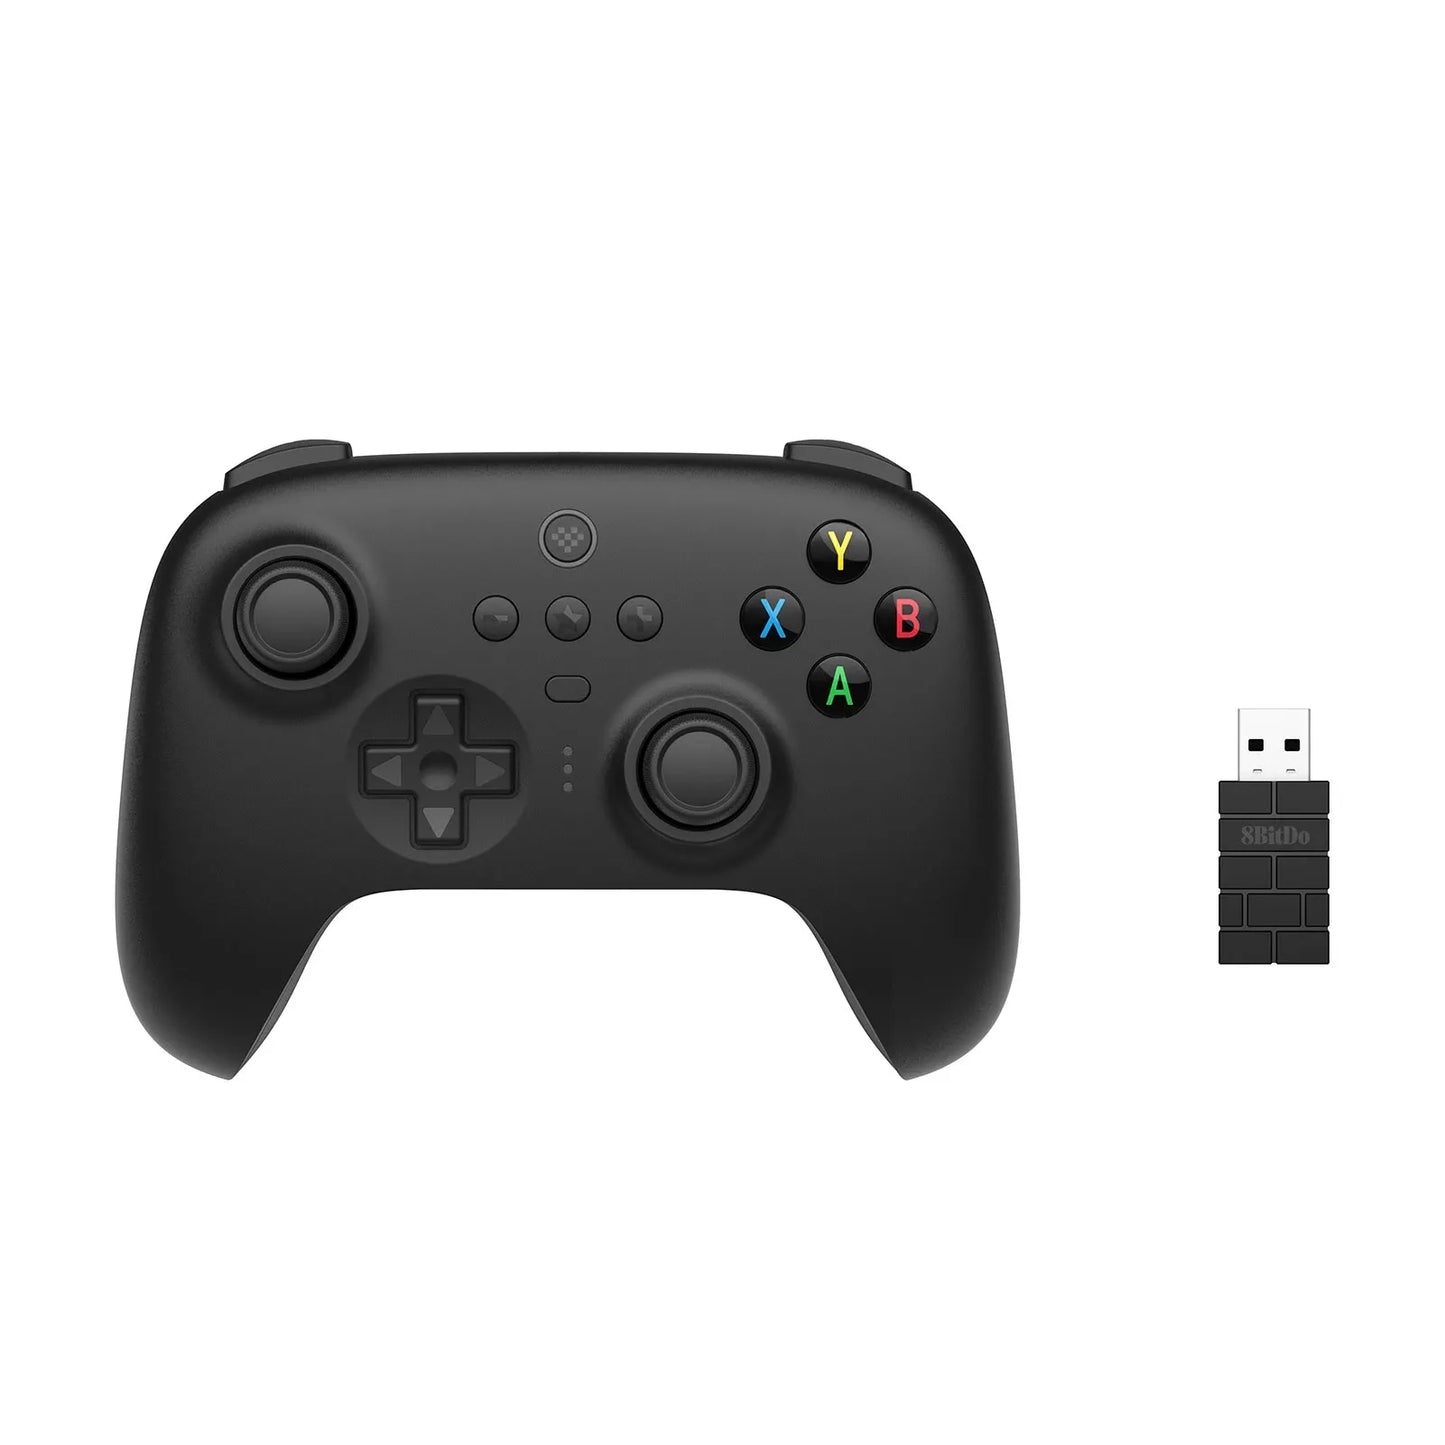 8BitDo Ultimate Wireless 2.4G Gaming Controller with Charging Dock for PC, Windows 10, 11, Steam Deck, Android